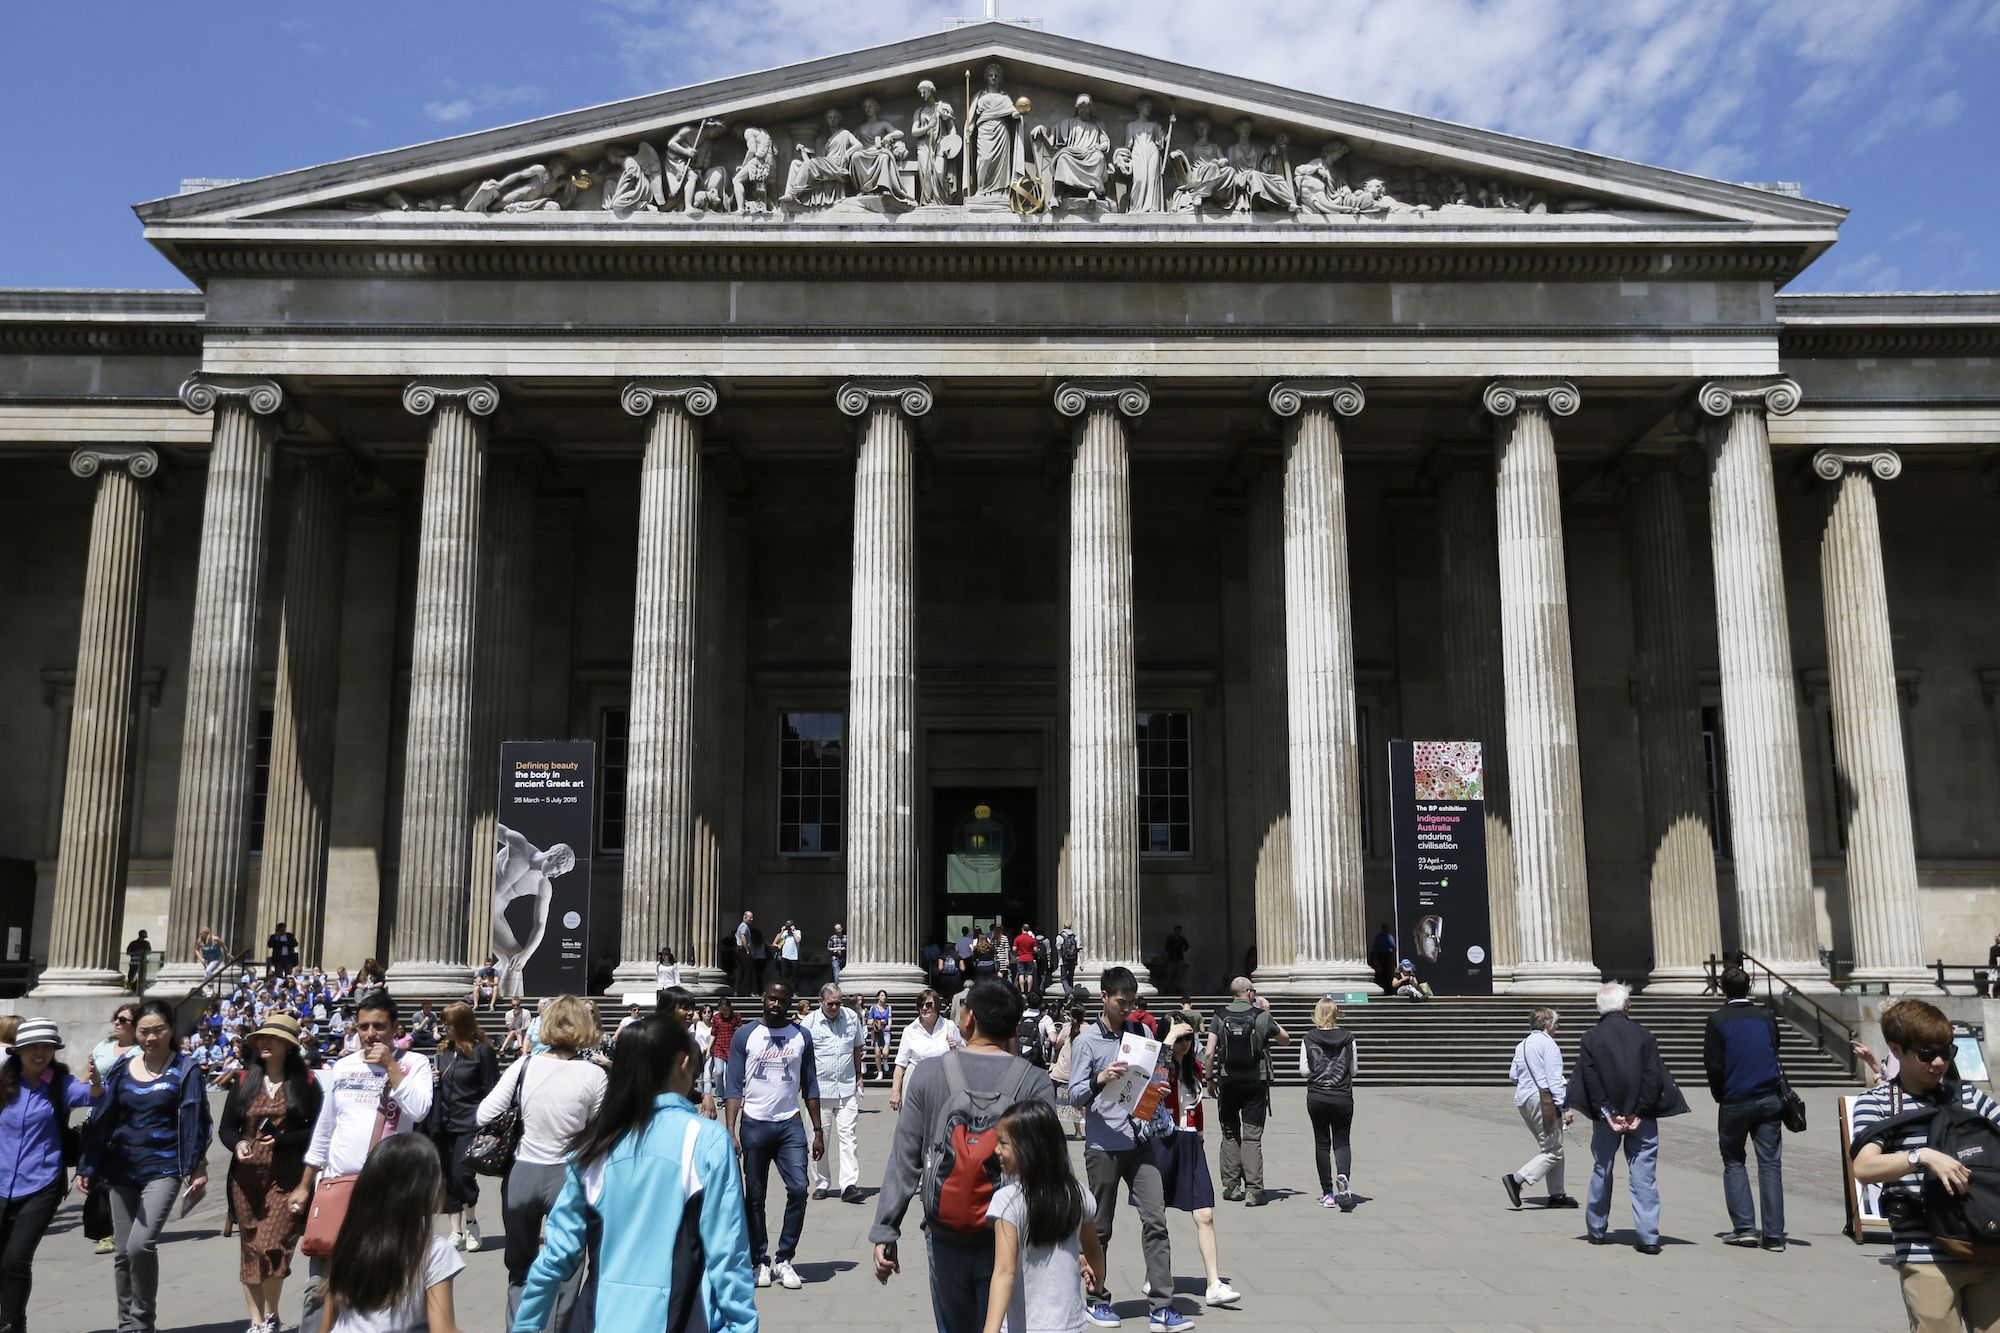 Visitors pictured on the steps of the British Museum in London on June 26, 2015